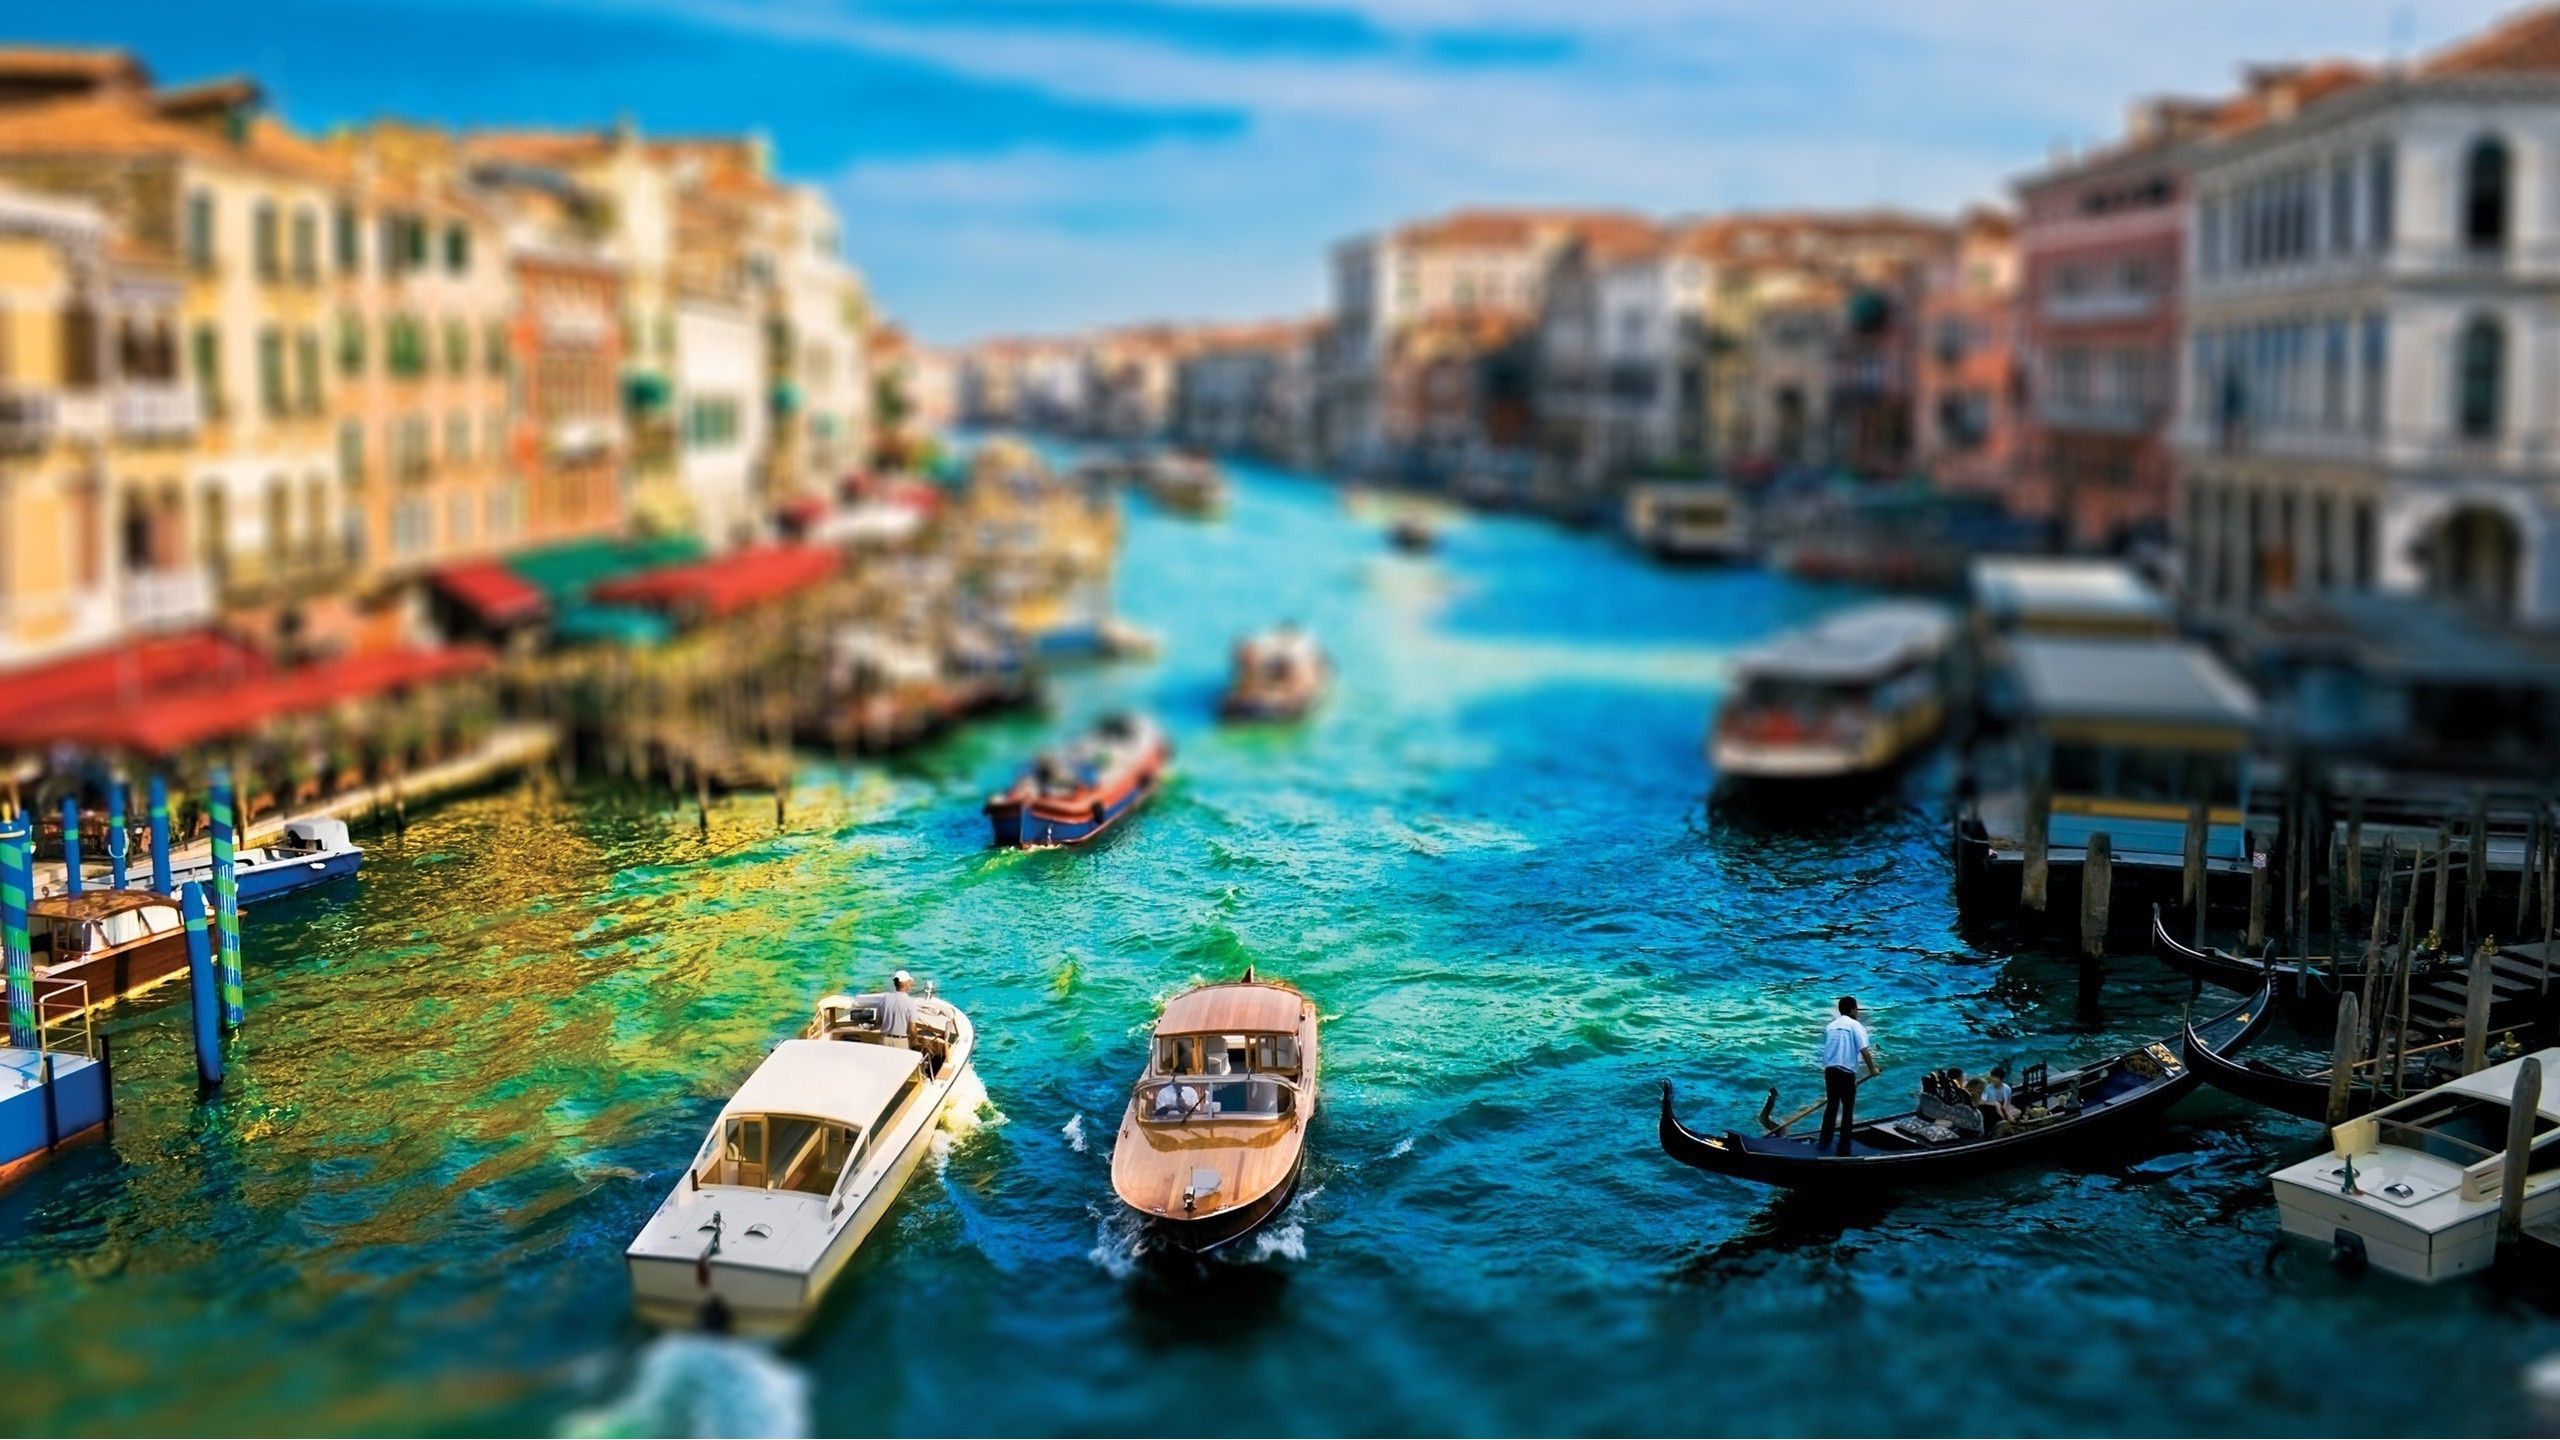 Wallpaper / photography, water, Venice, Italy, tilt shift free download